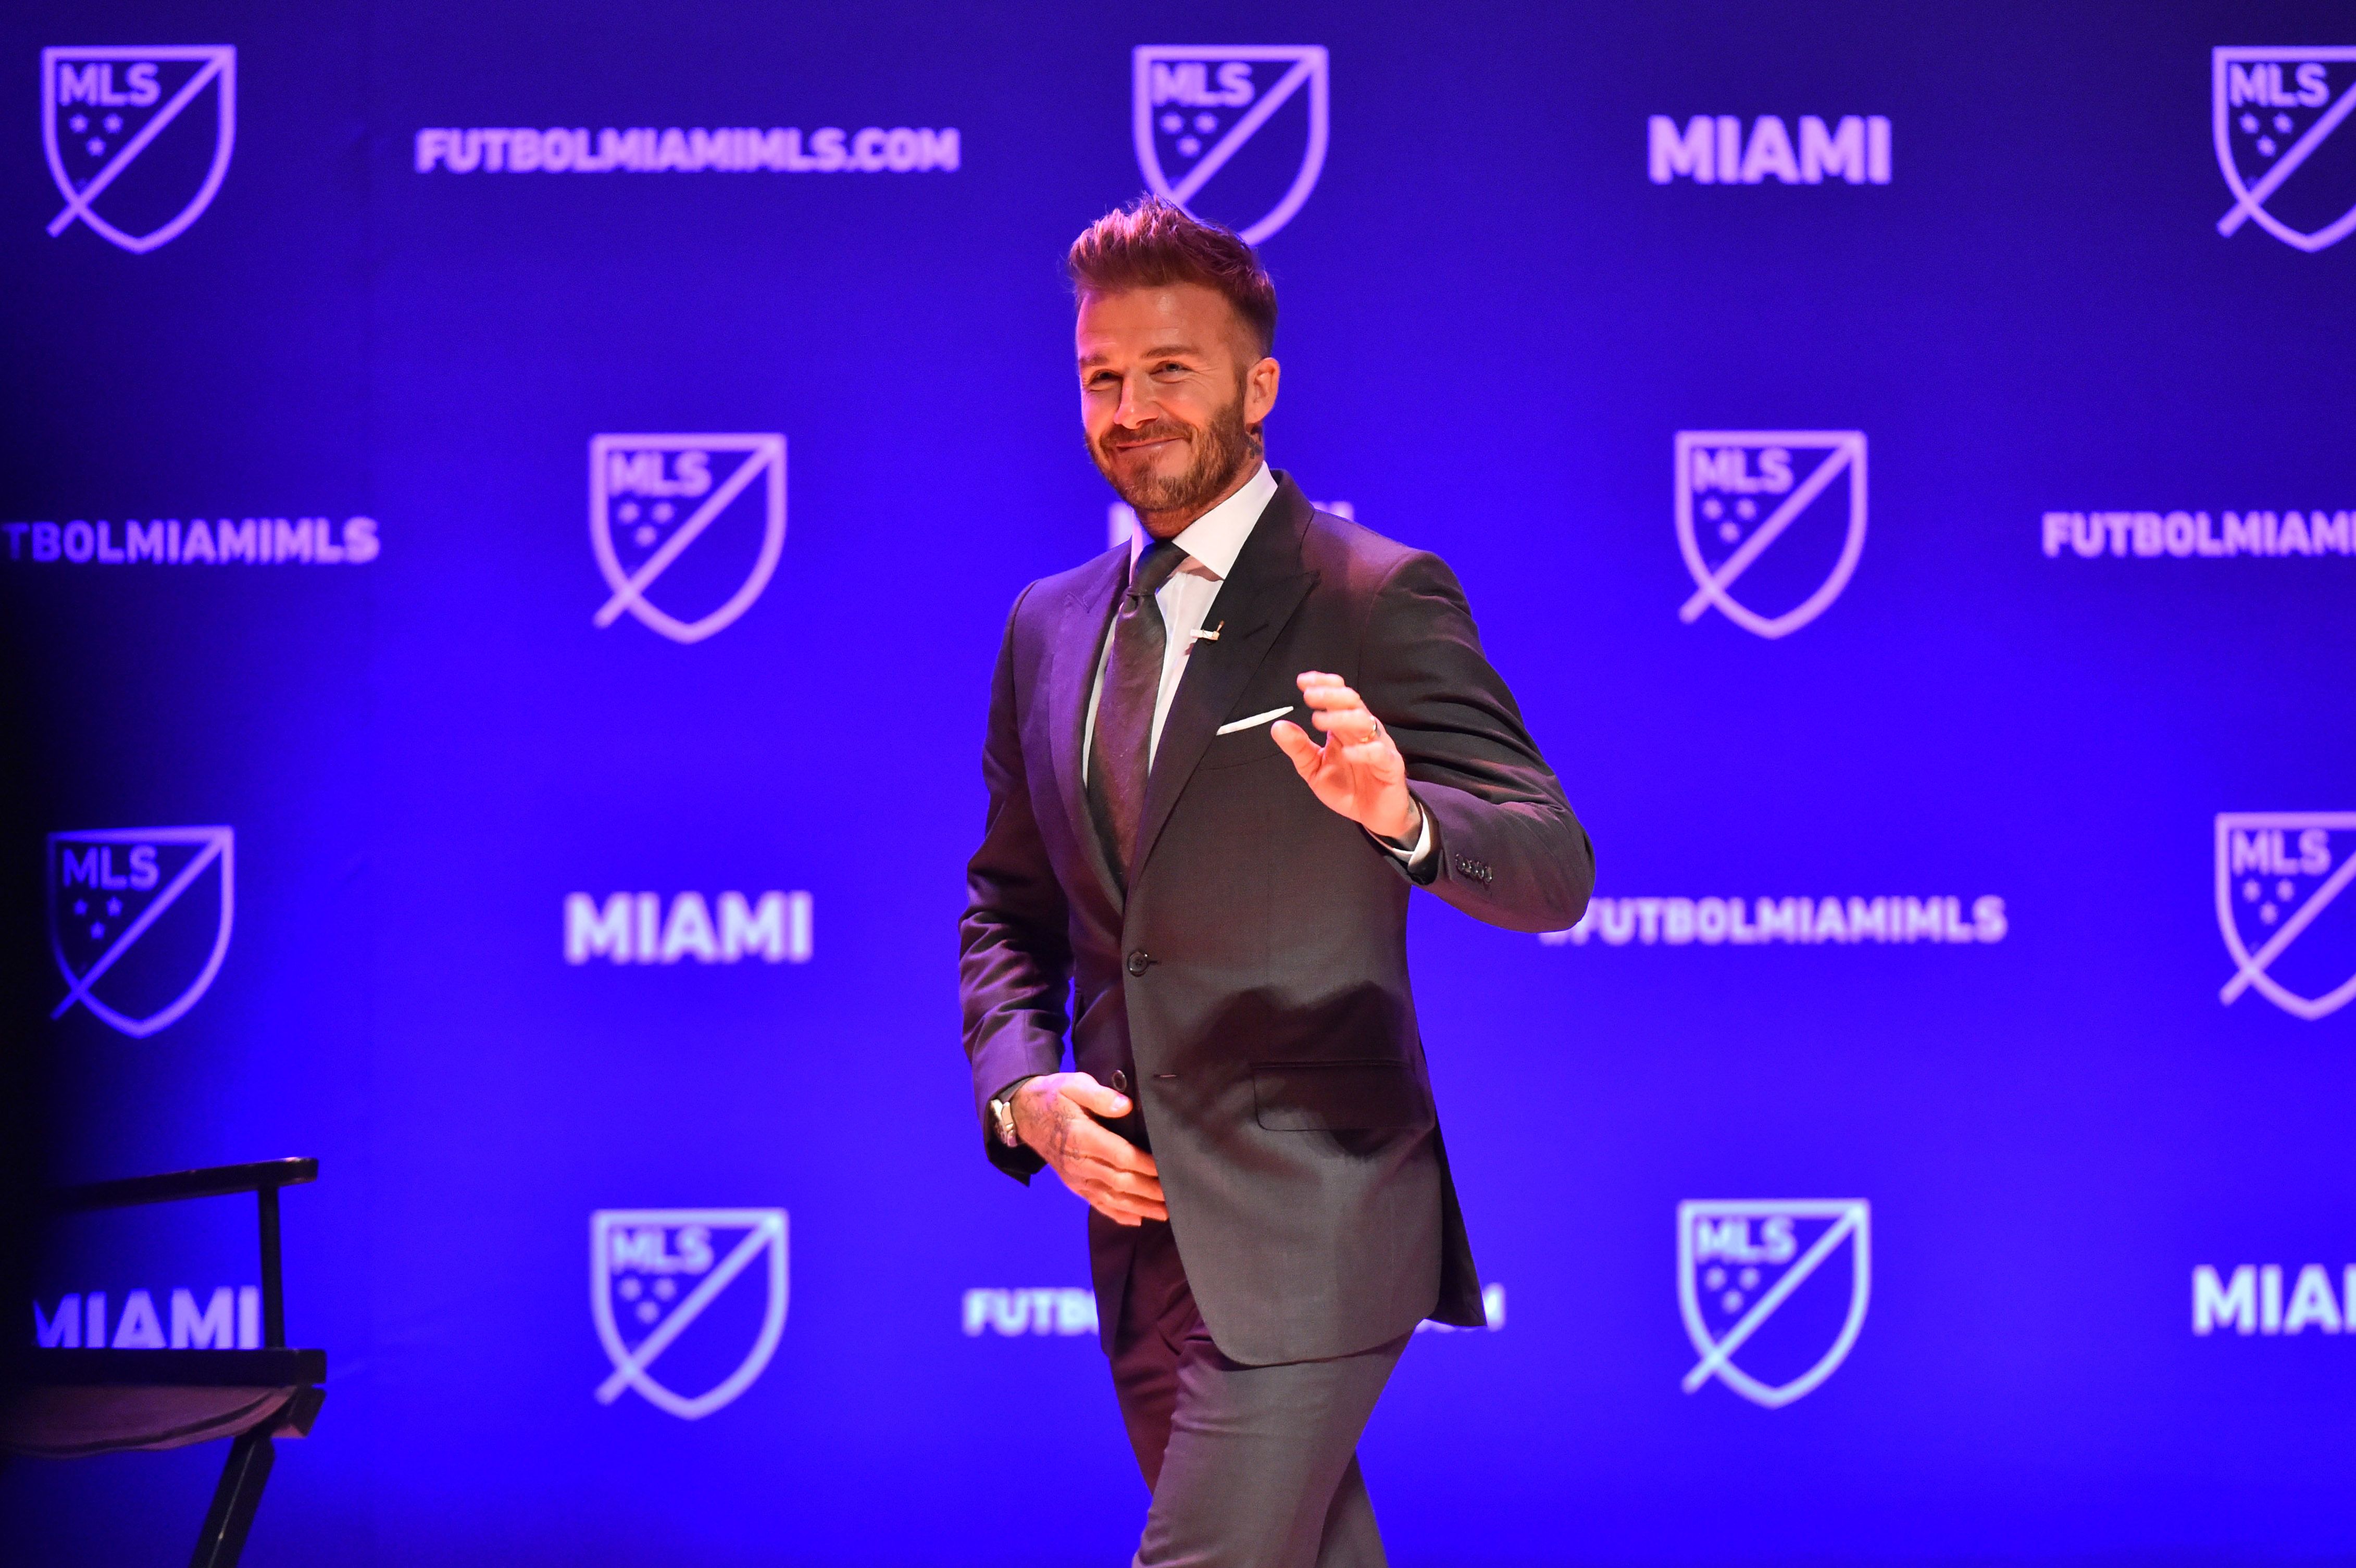 Beckham may have hinted at Inter Miami's first kit with legos. : r/MLS